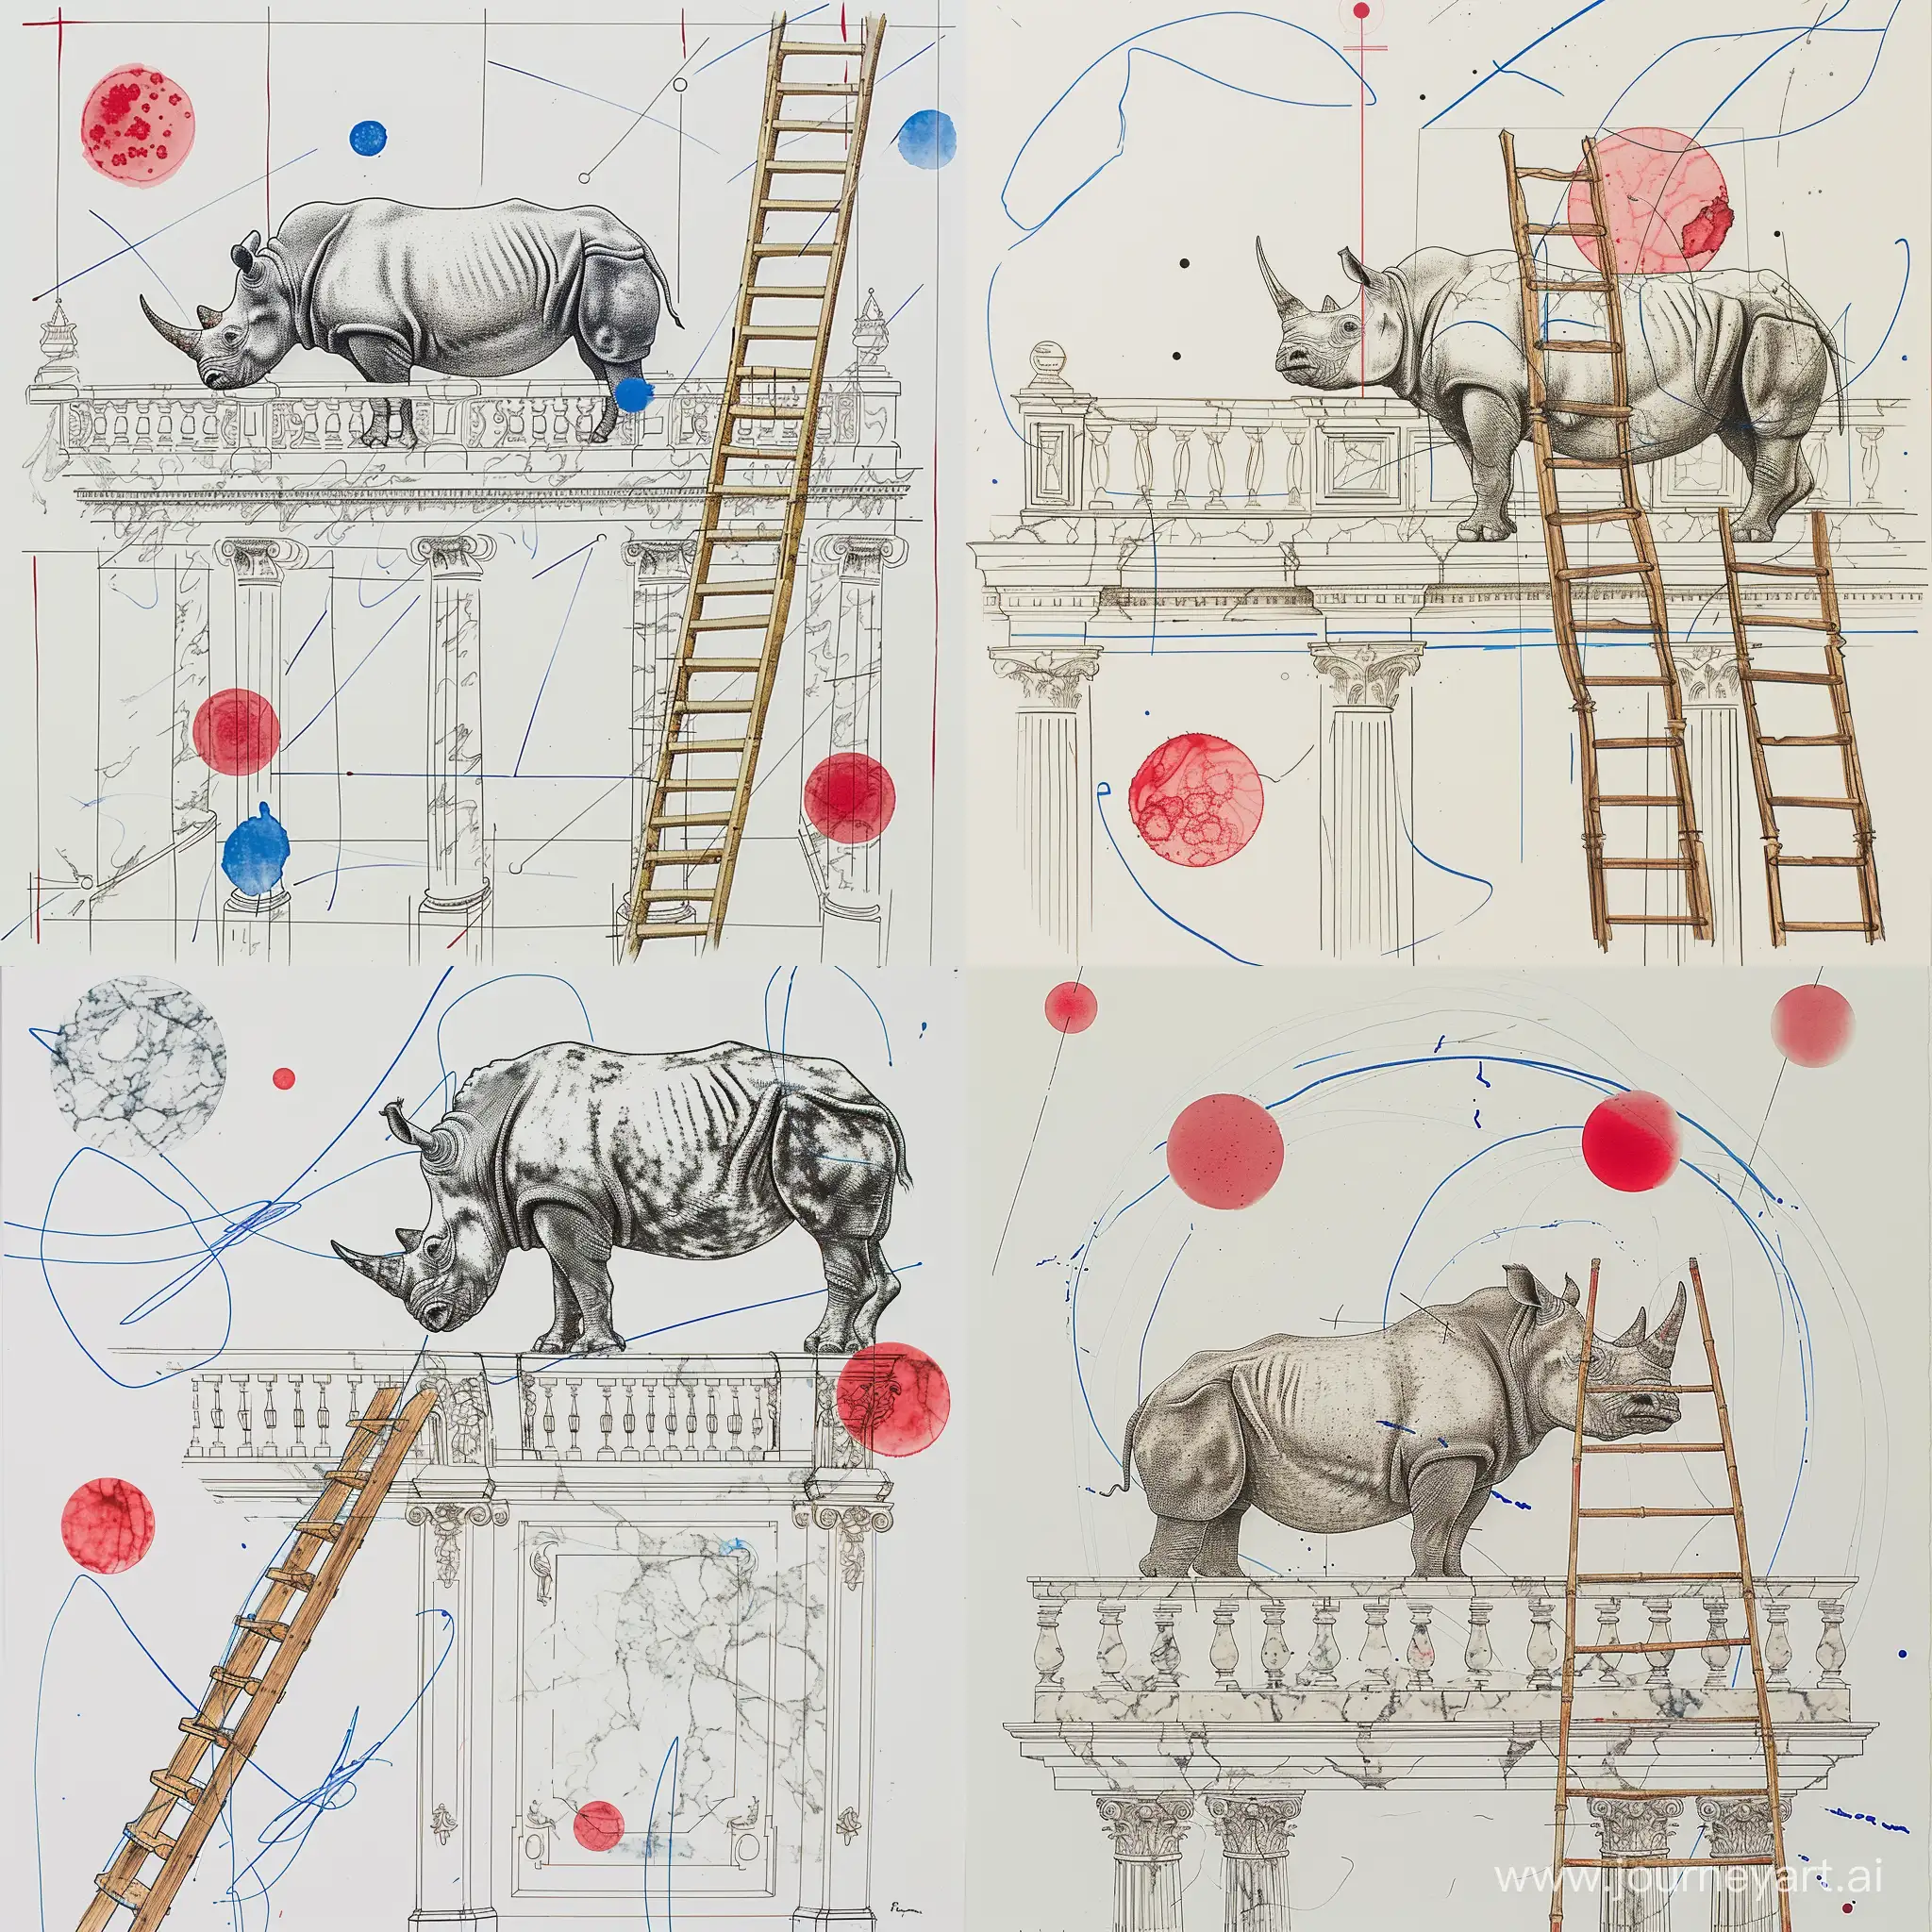 a minimalist abstract drawing depicting a Majestic Rhinoceros, a Tall Big Wooden ladder, and Elegant Marble Rococo Balustrade and Parapet, alcohol ink, thin blue scribbled lines, red circular patches, in the style of William Kentridge